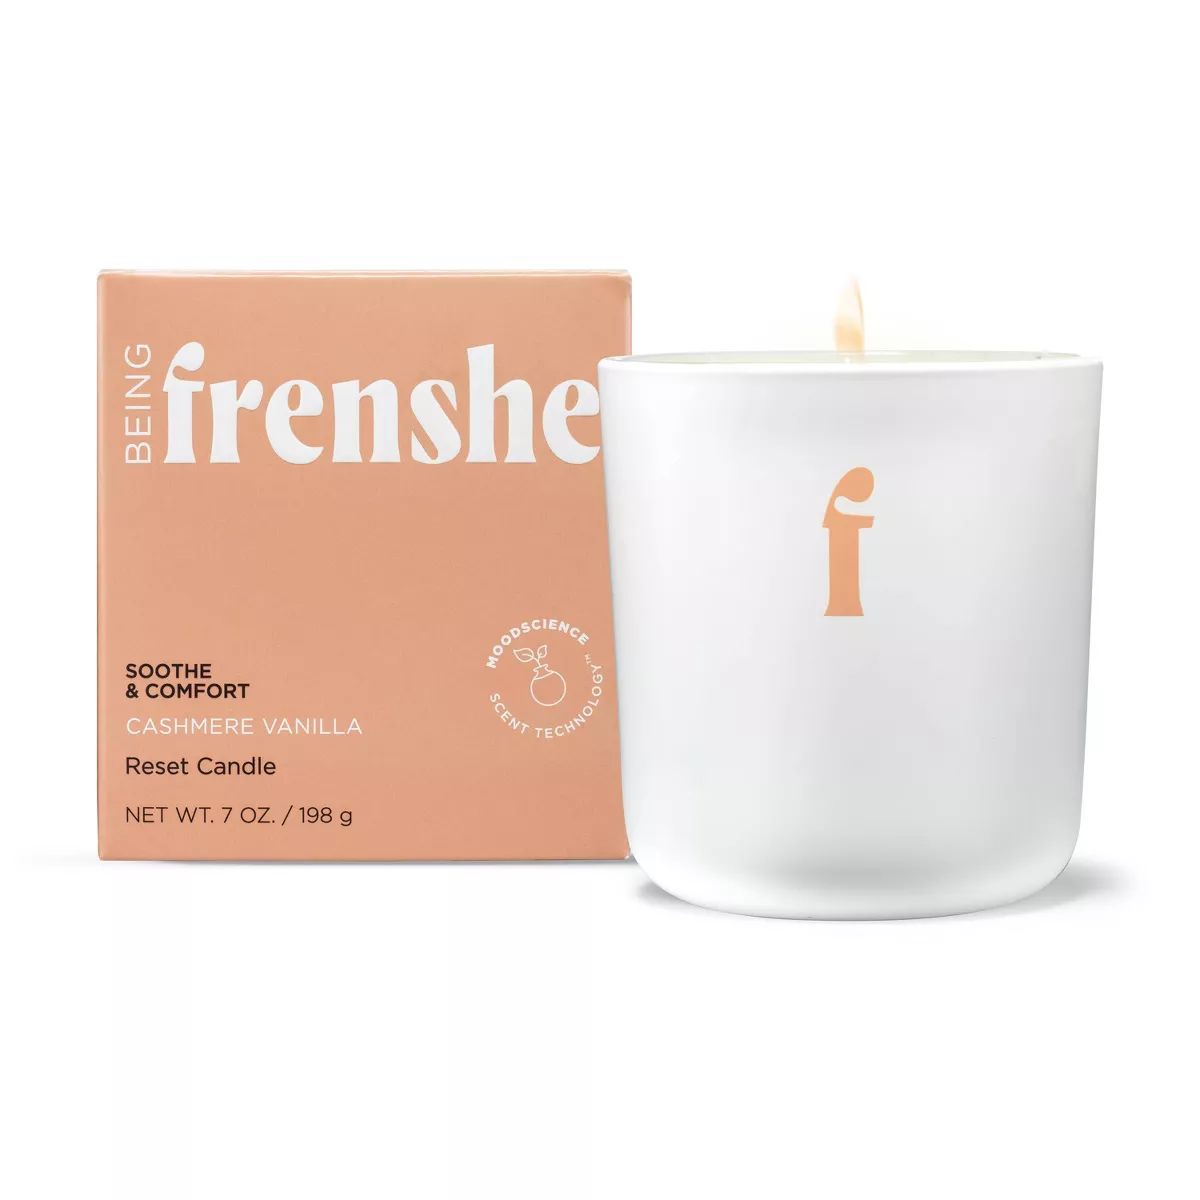 Being Frenshe Coconut & Soy Wax Reset Candle with Essential Oils - Cashmere Vanilla - 7oz | Target